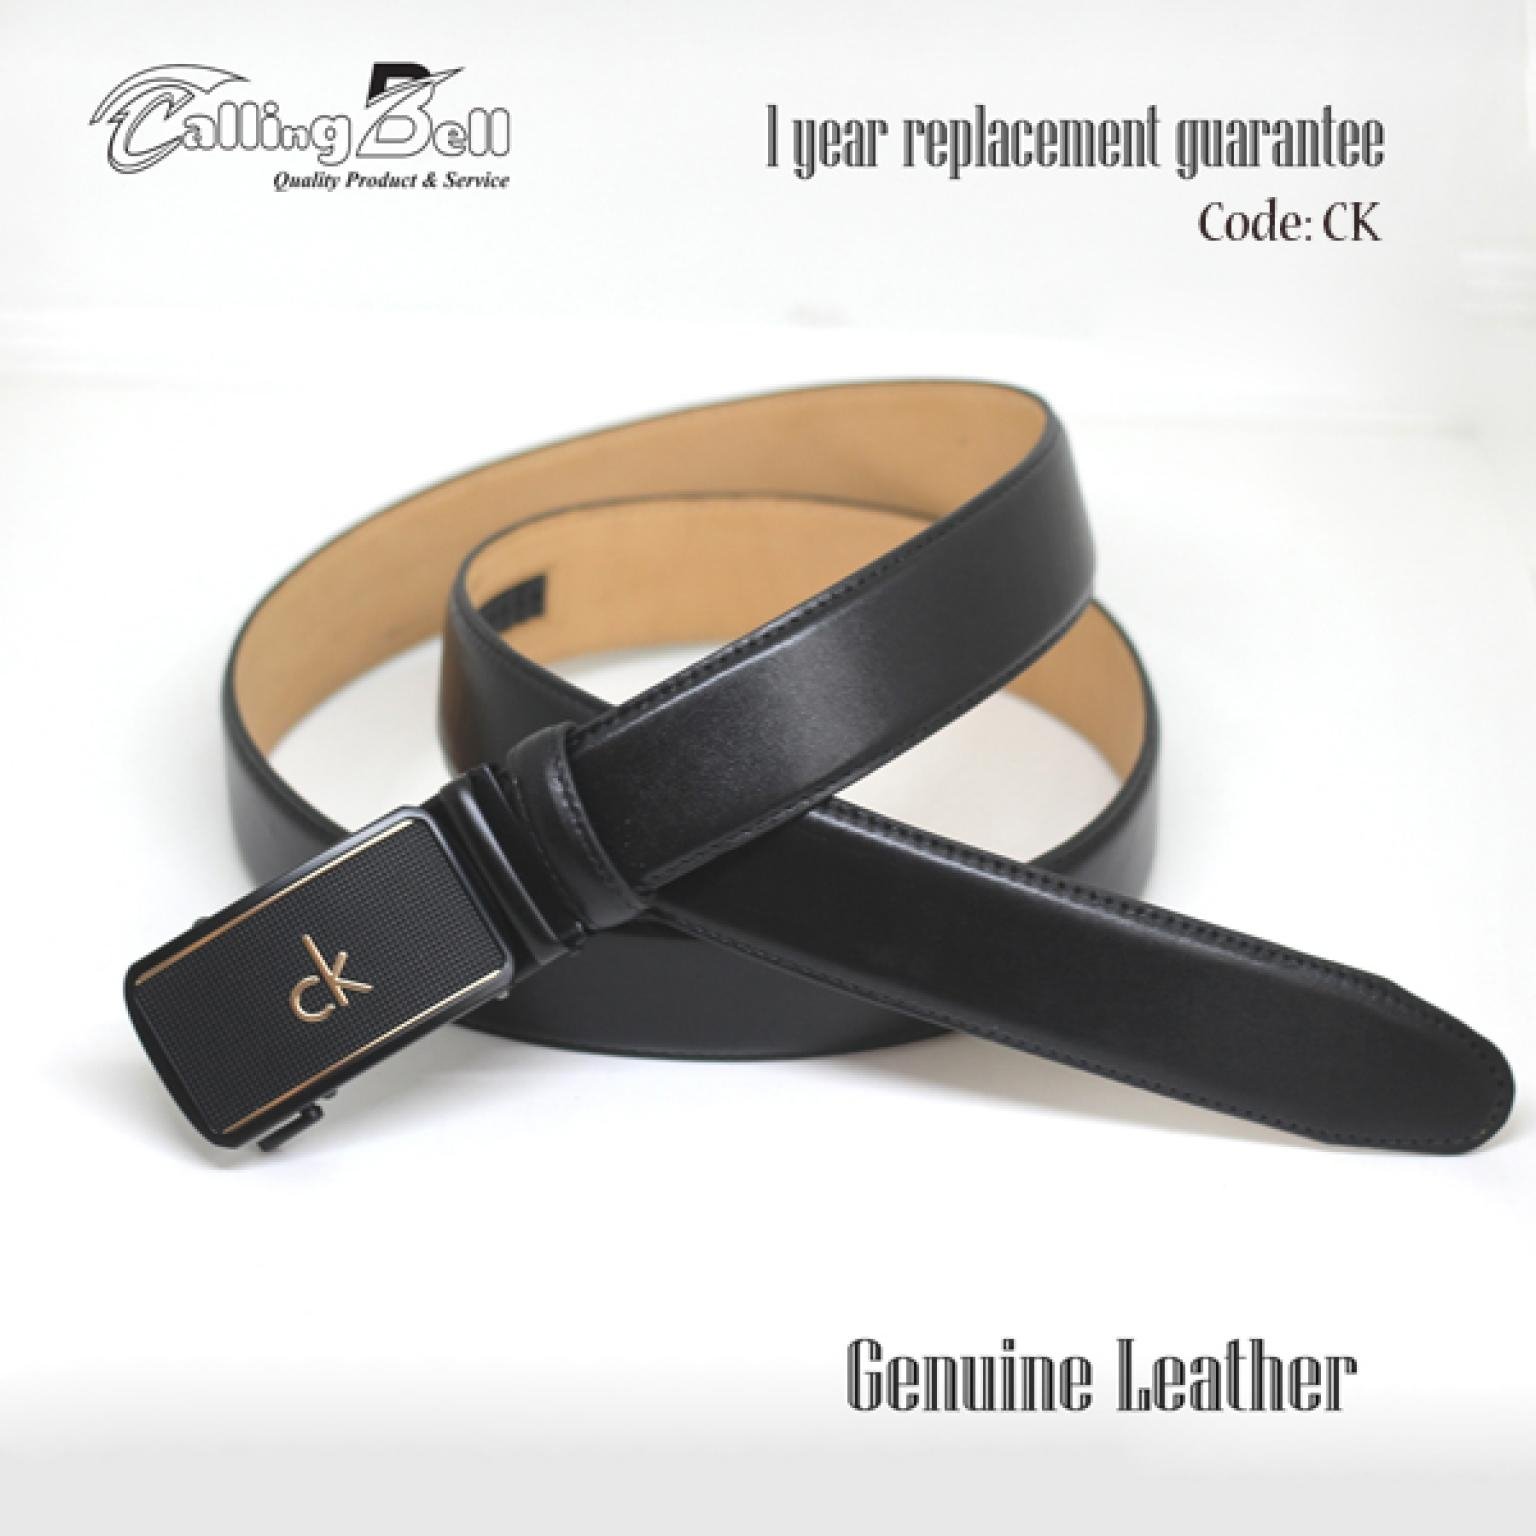 GENUINE_LEATHER SOFT AUTO GEAR BELT CASUAL AND FORMAL FOR MEN (CK)